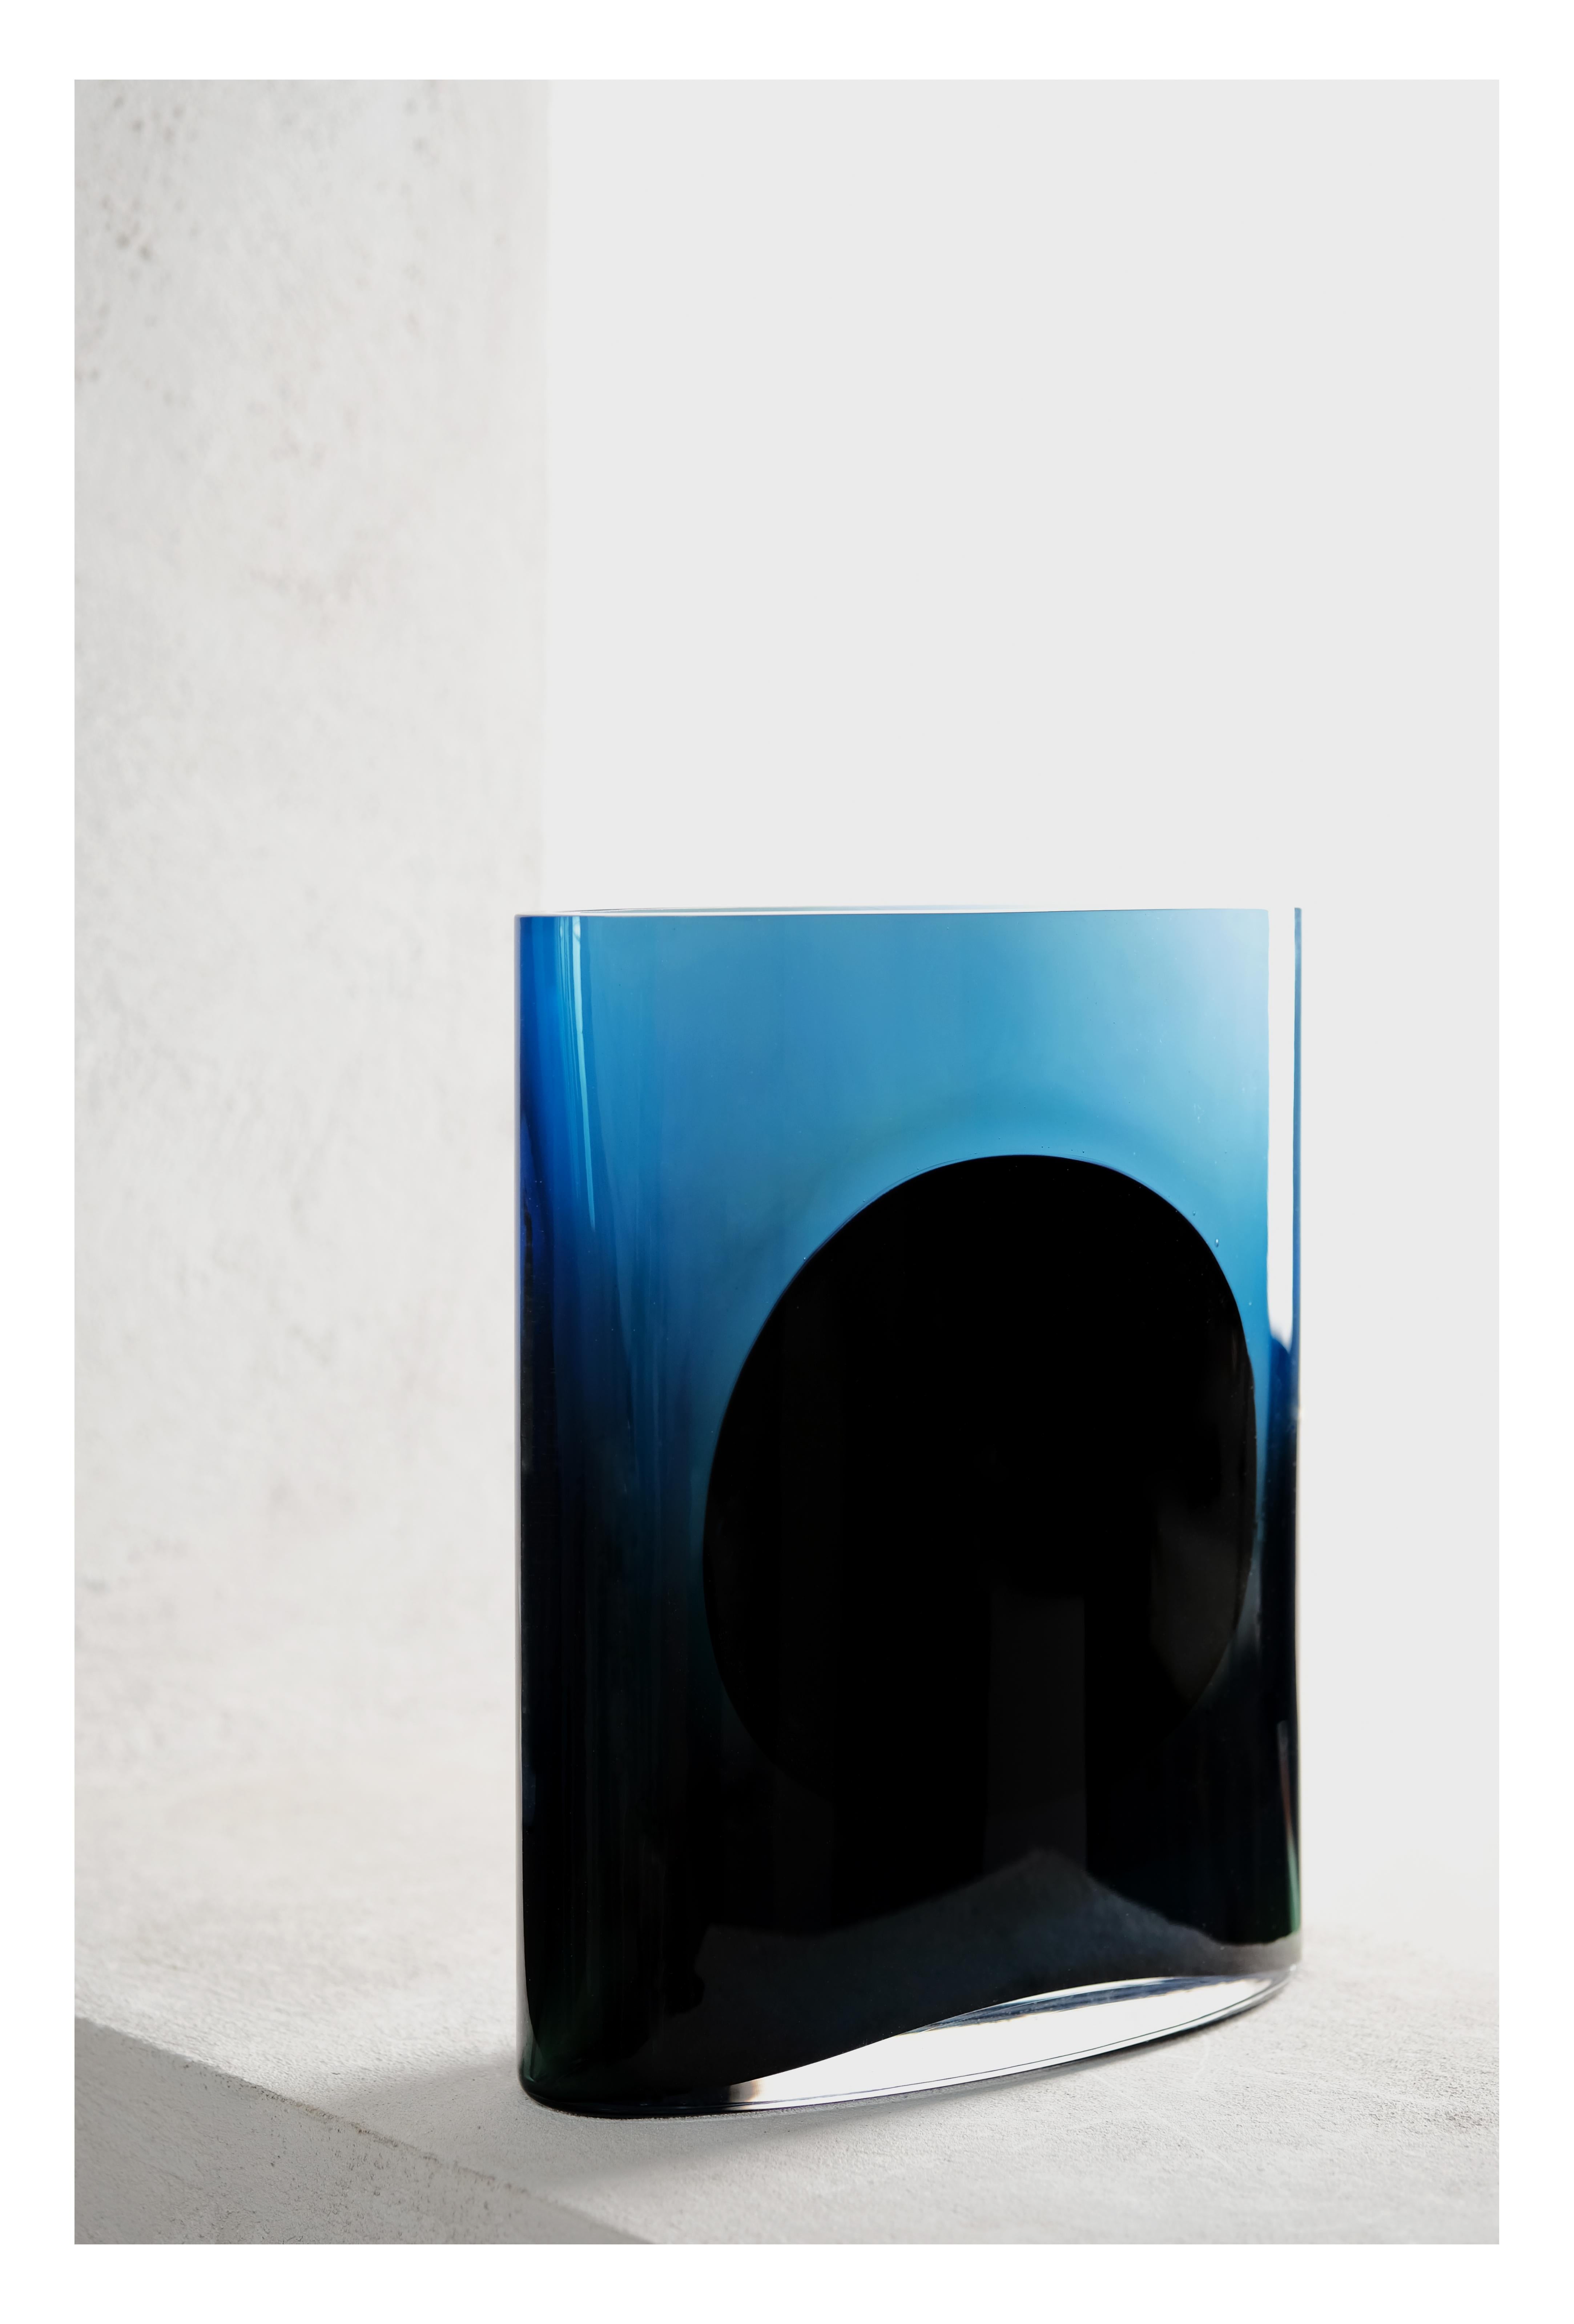 The result of a year-long collaboration between the Swiss-French designer and Nouvel Studio, Isla explores the juxtaposition of myriad hues and glass transparencies through two different vase sizes. The simplicity of the design accentuates the